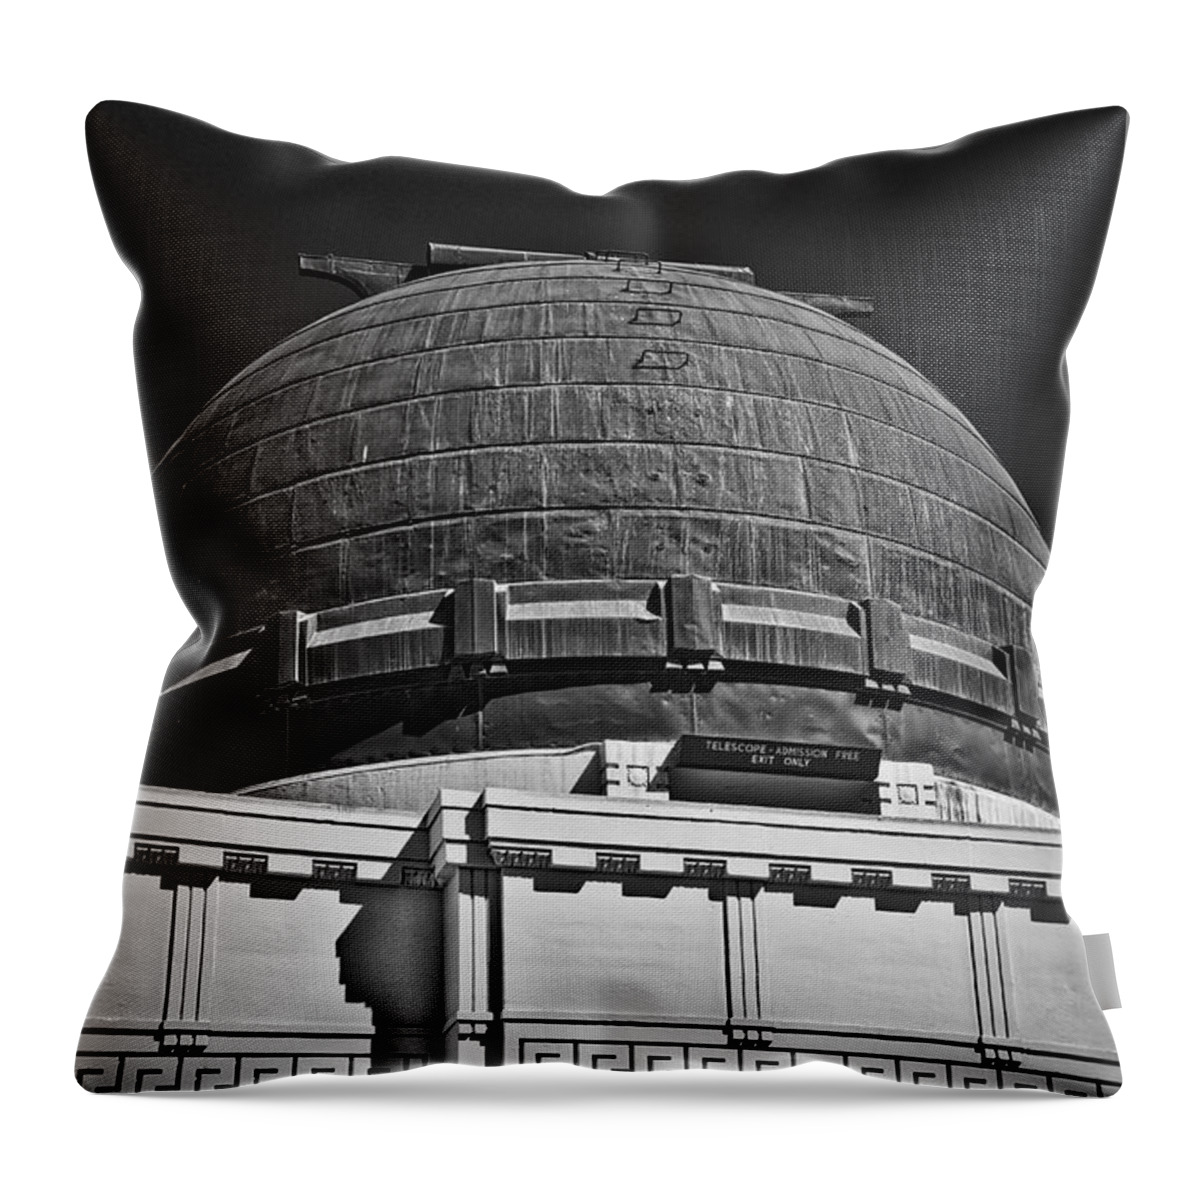 Griffith-park Throw Pillow featuring the photograph Observatory In Art Deco by Kirt Tisdale